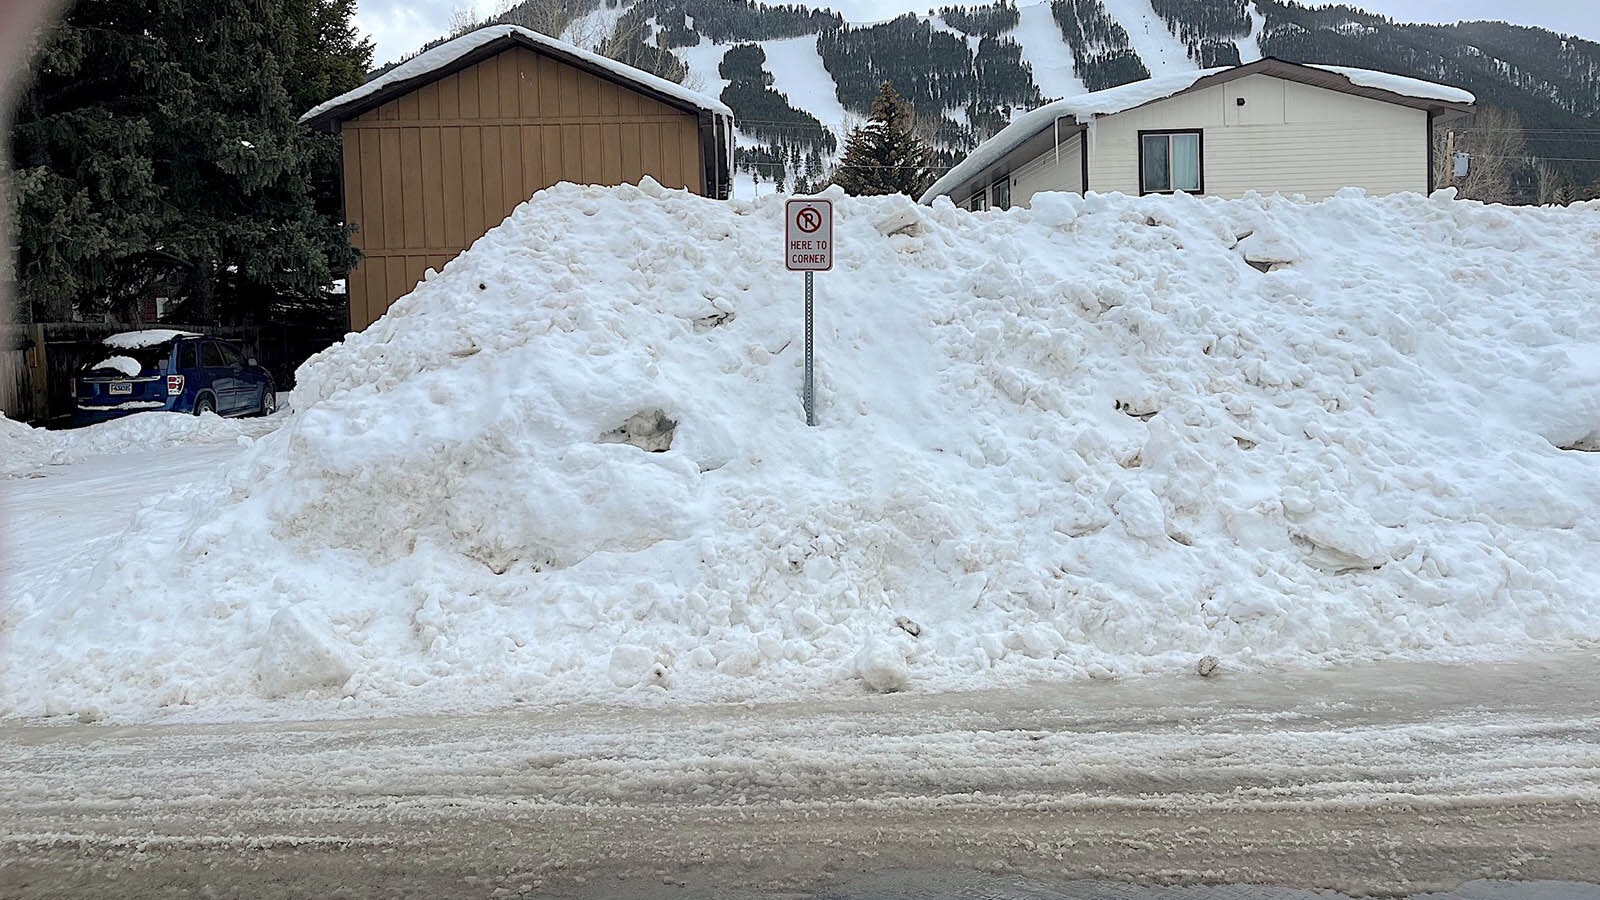 Snow piled up last winter around Jackson Hole, Wyoming, as storms would dump on top of each other and cold temperatures kept melting at a minimum.